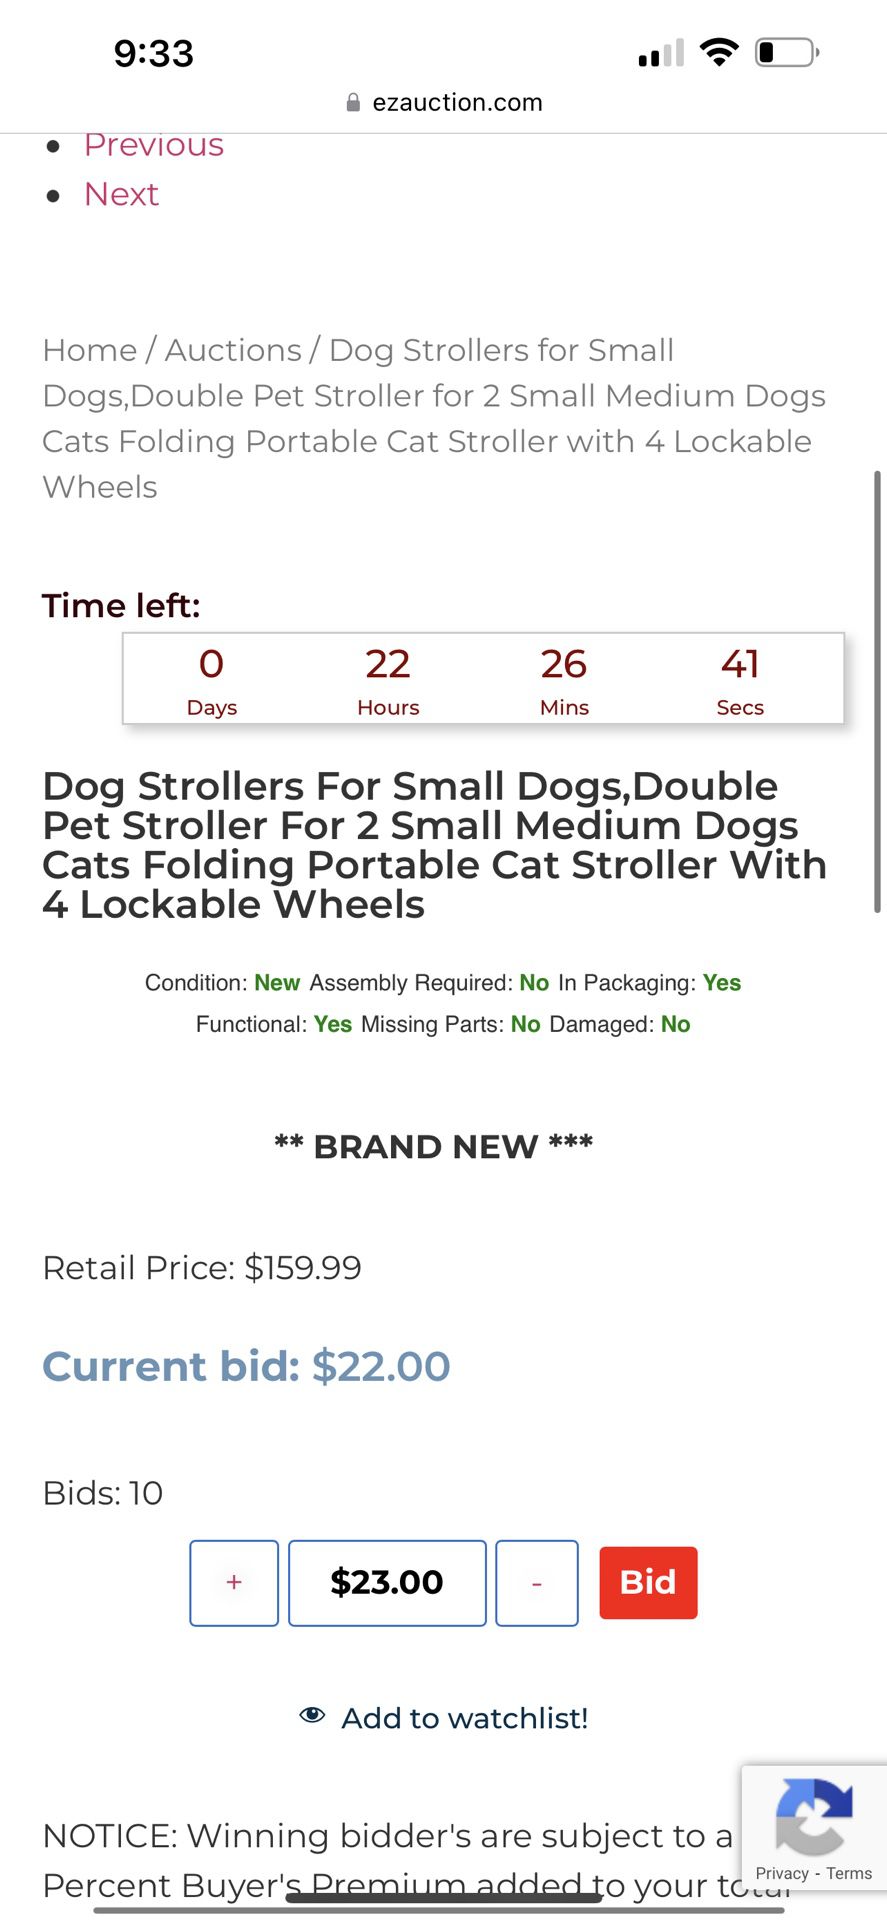 Dog Strollers For Small Dogs,Double Pet Stroller For 2 Small Medium Dogs Cats Folding Portable Cat Stroller With 4 Lockable Wheels